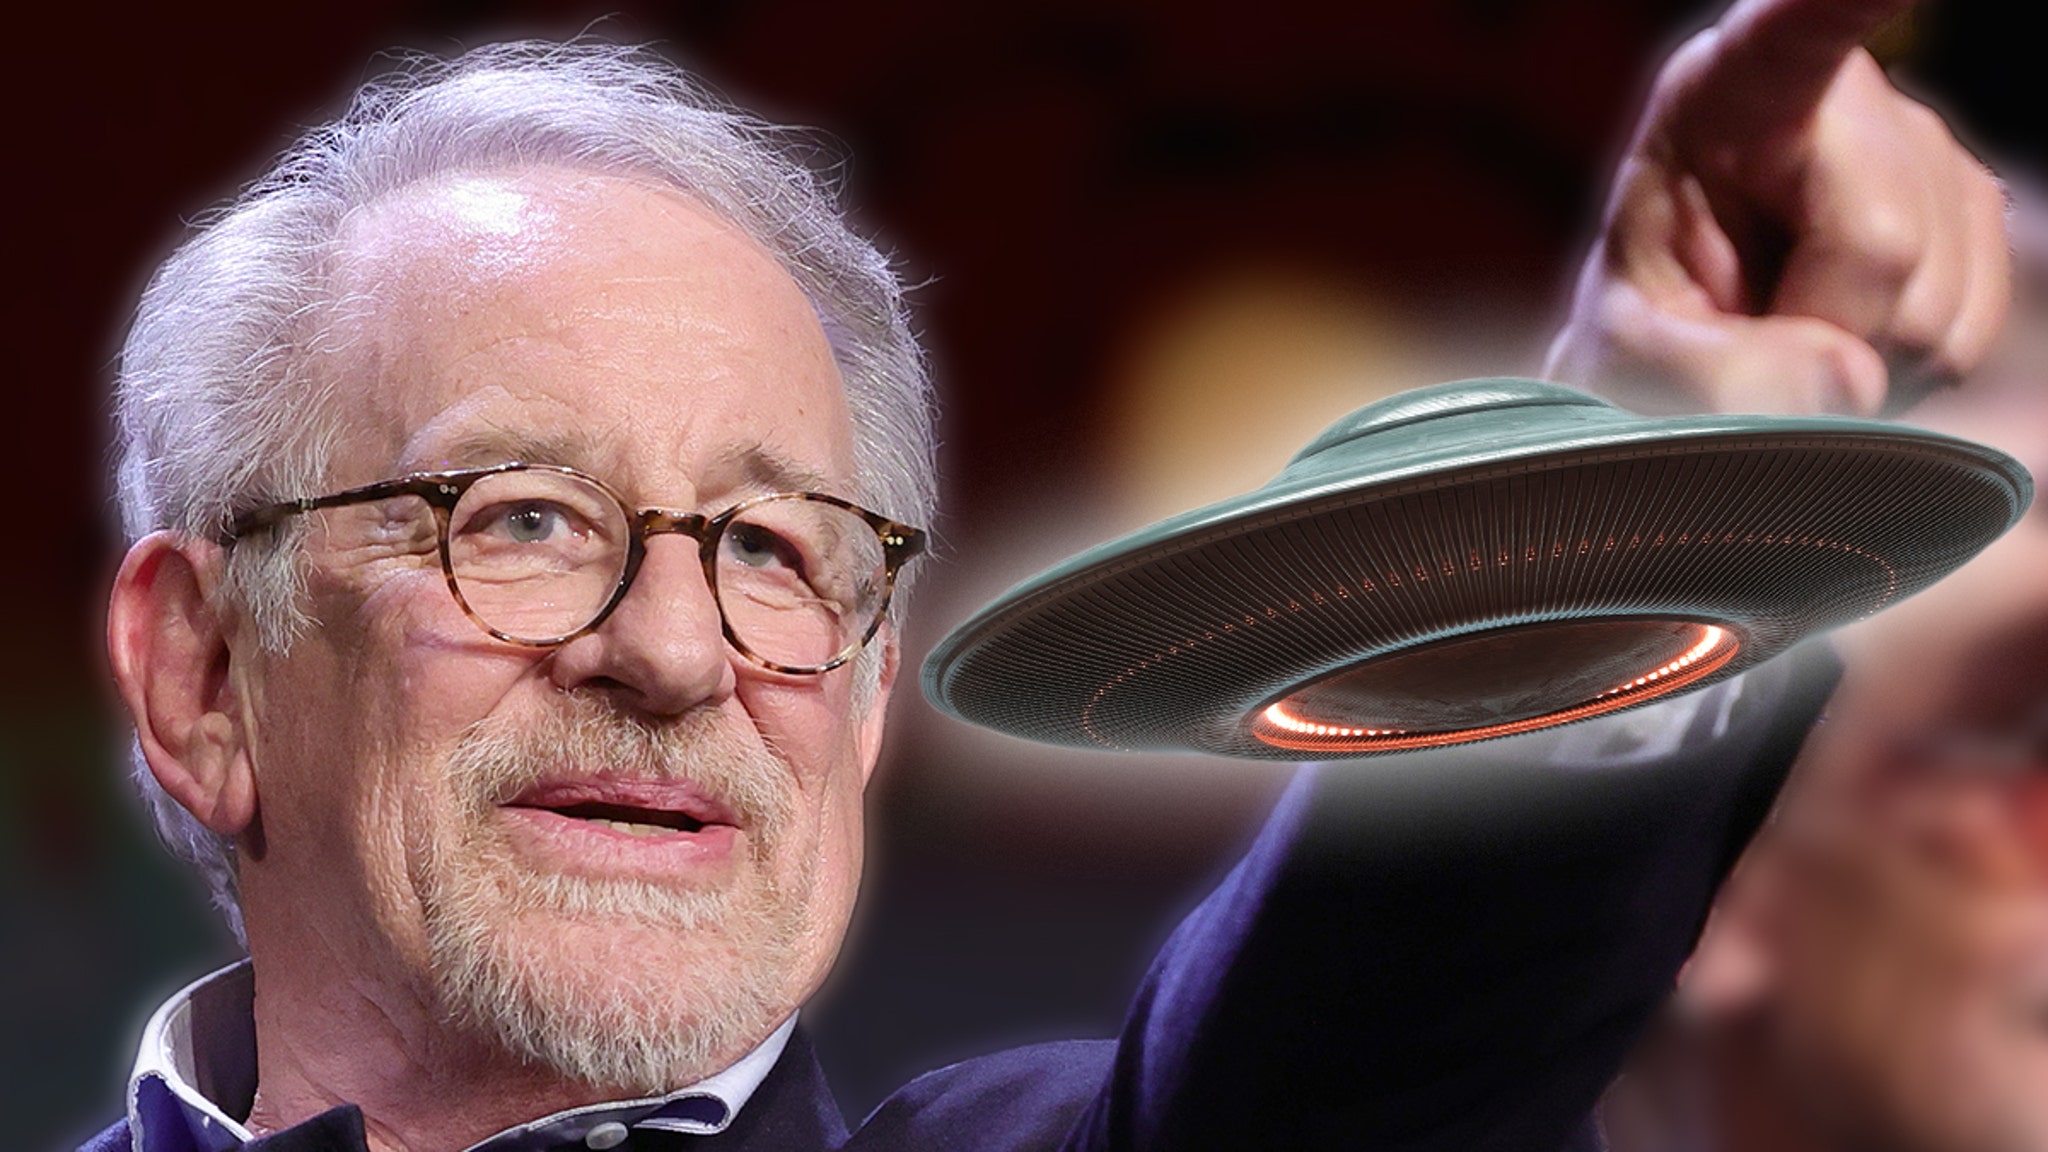 Steven Spielberg Says Government Hiding Info on UFOs, There’s Life Out There